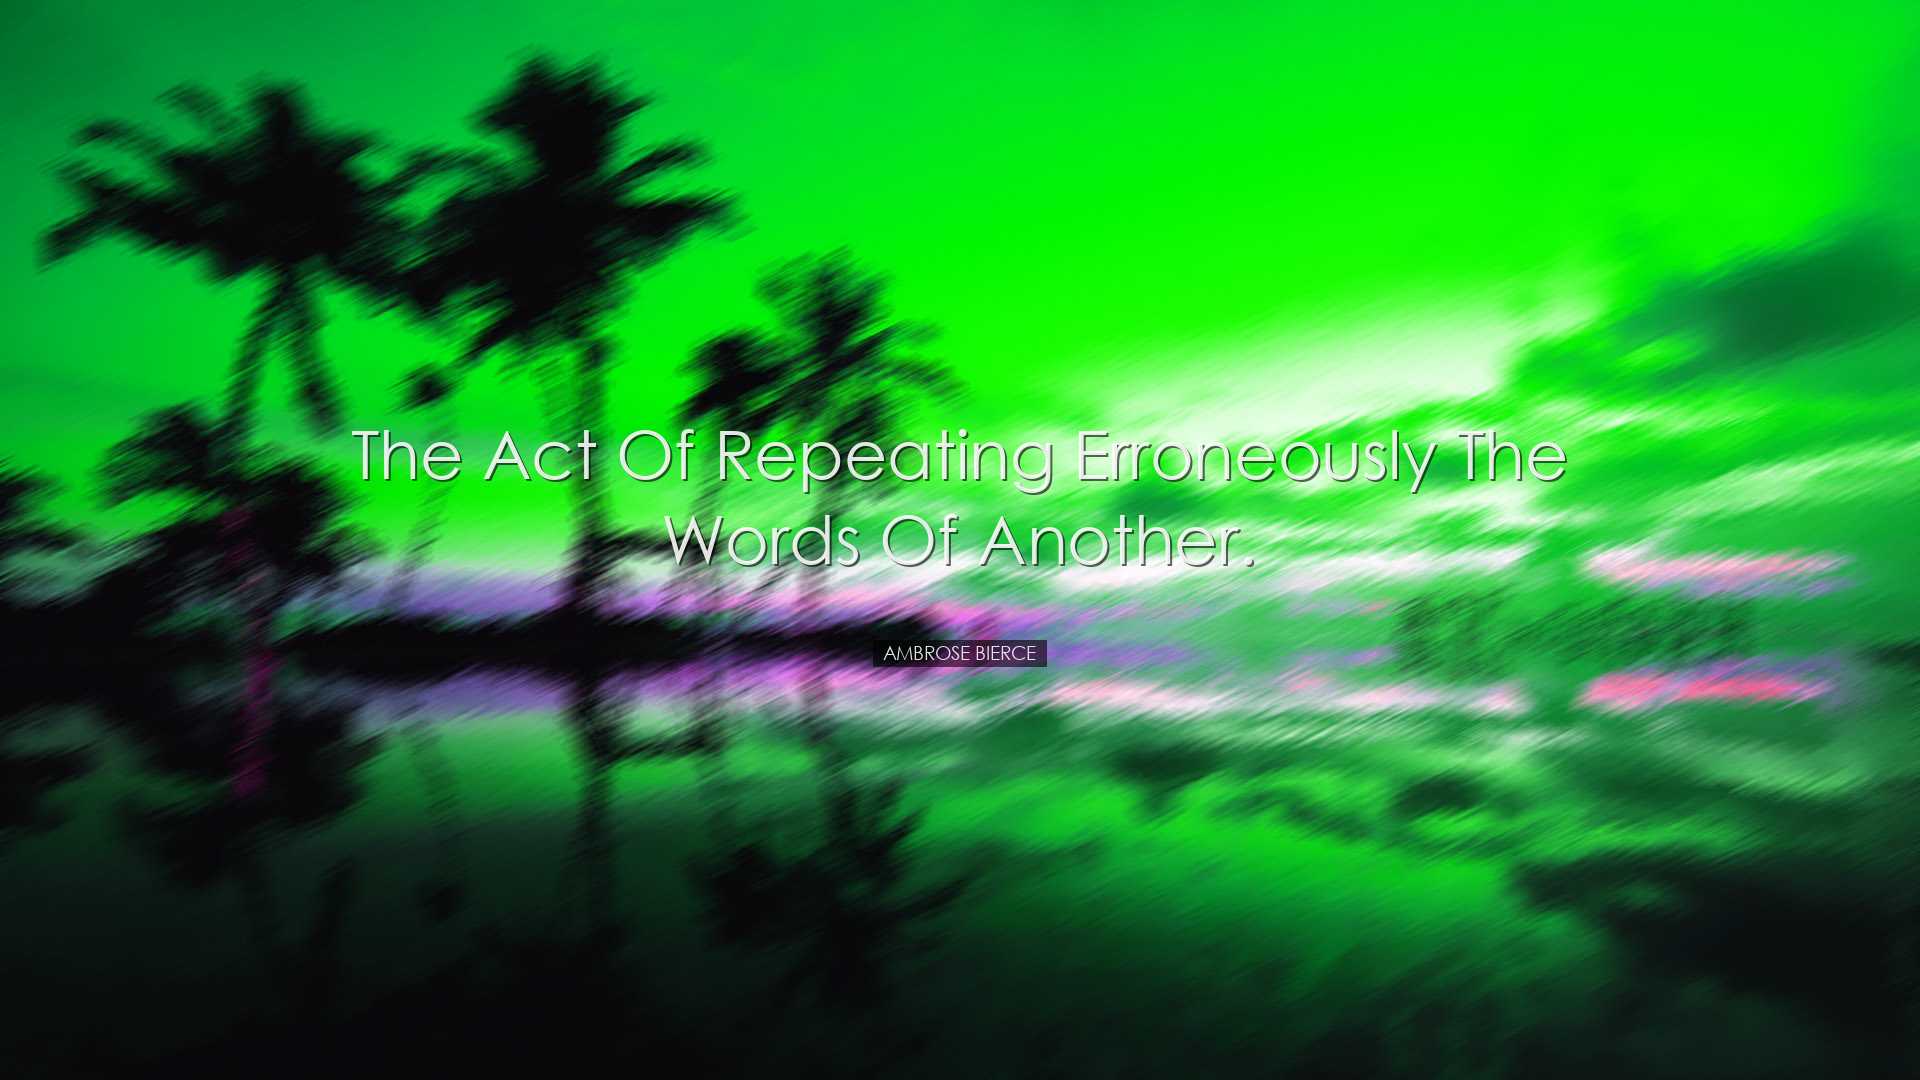 The act of repeating erroneously the words of another. - Ambrose B